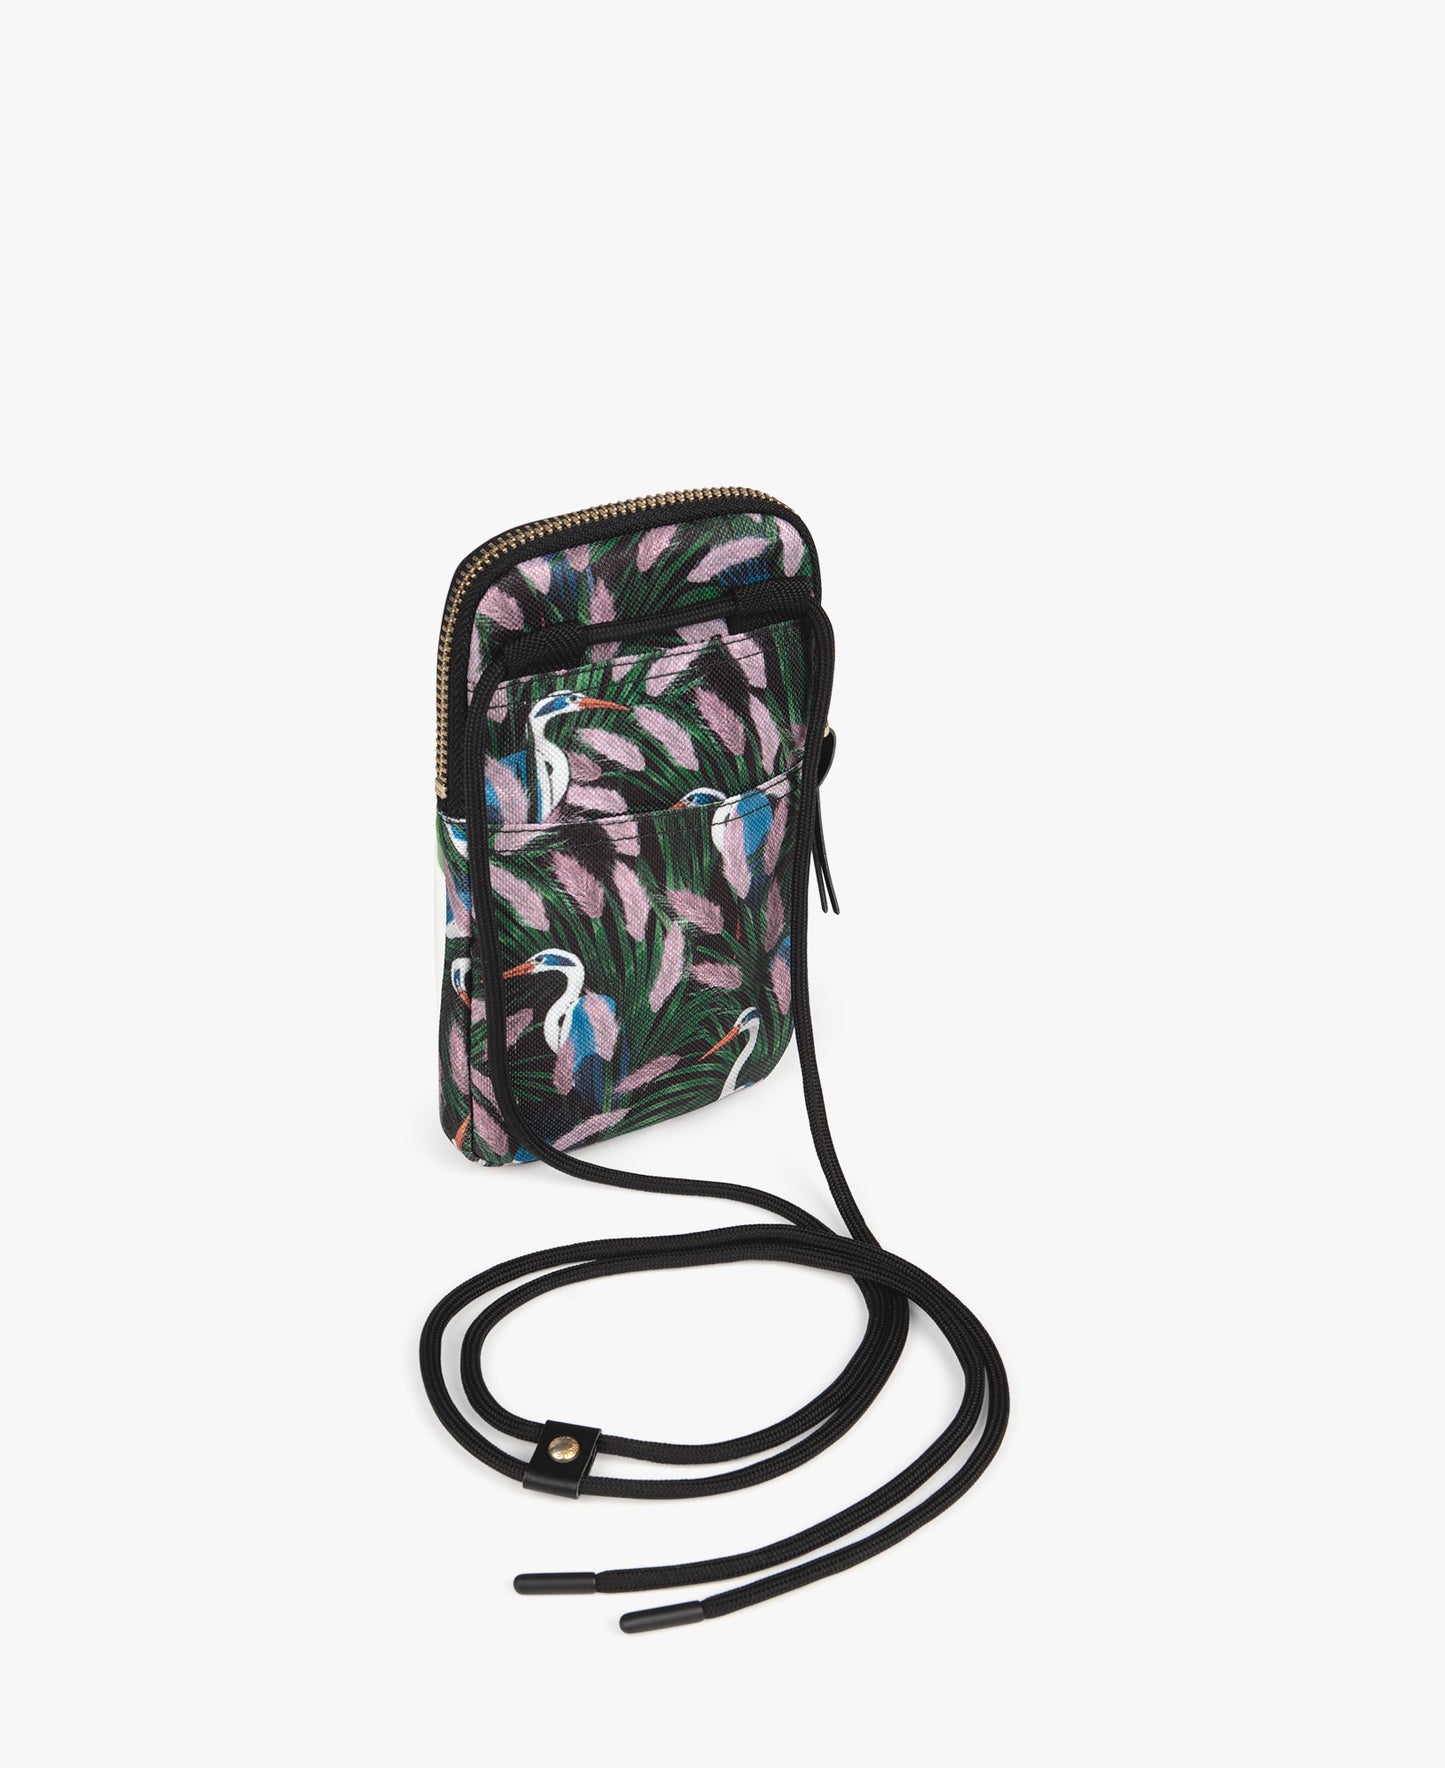 Lucy Phone Bag